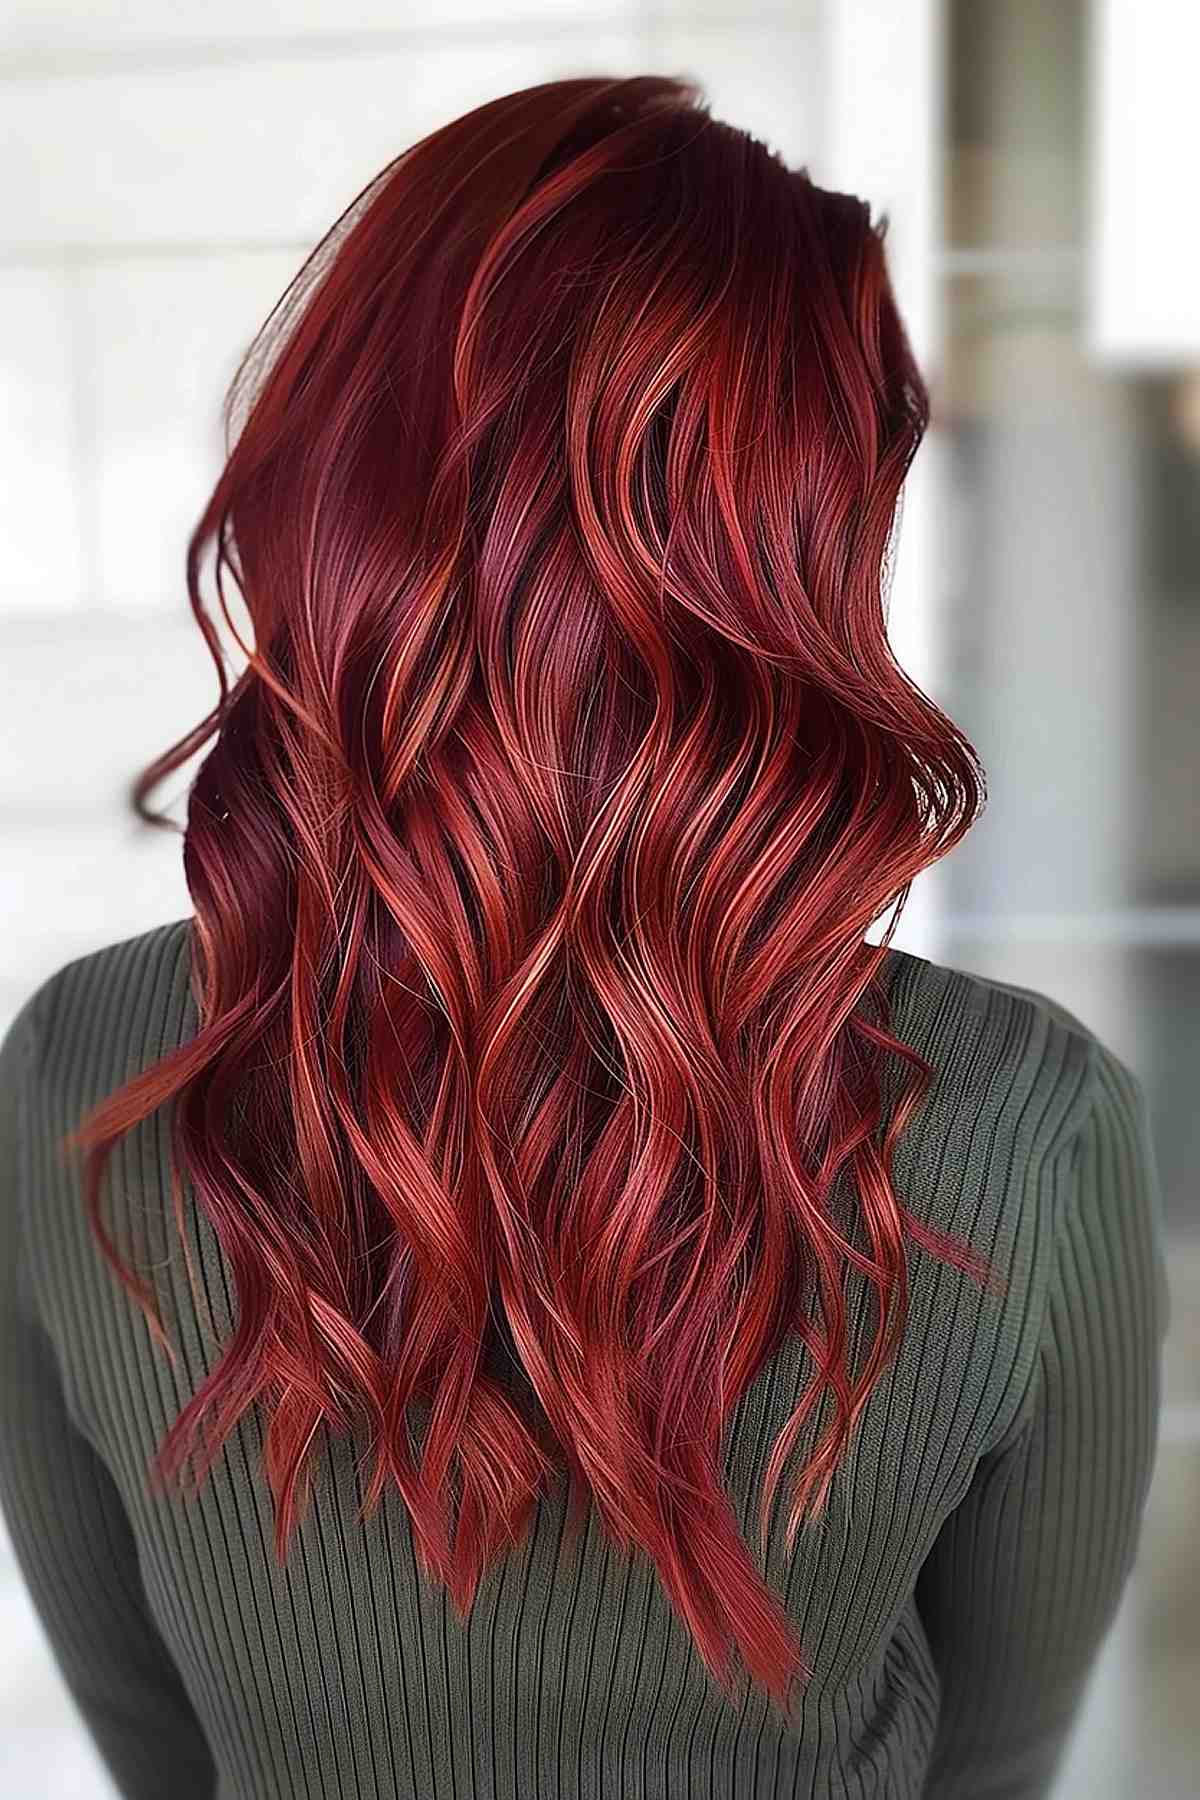 Cherry red hair mixed with brown highlights for added depth and lower maintenance.